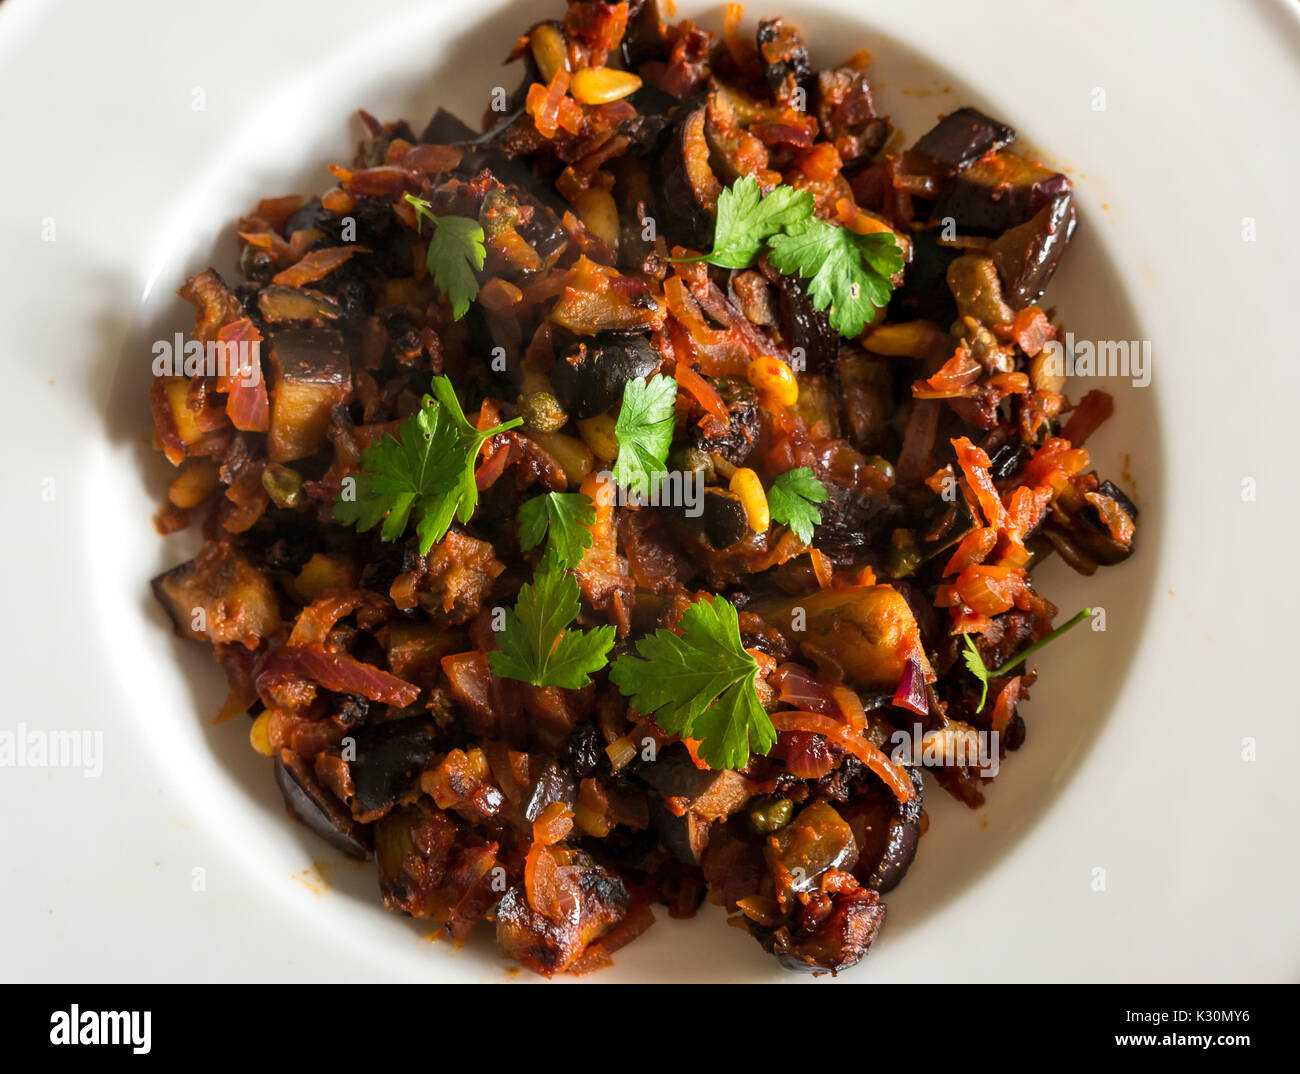 Close up of Sicilian dish, Caponata, with aubergine, olives, capers, red onion, pine kernels, tomato paste, served on a white plate Stock Photo